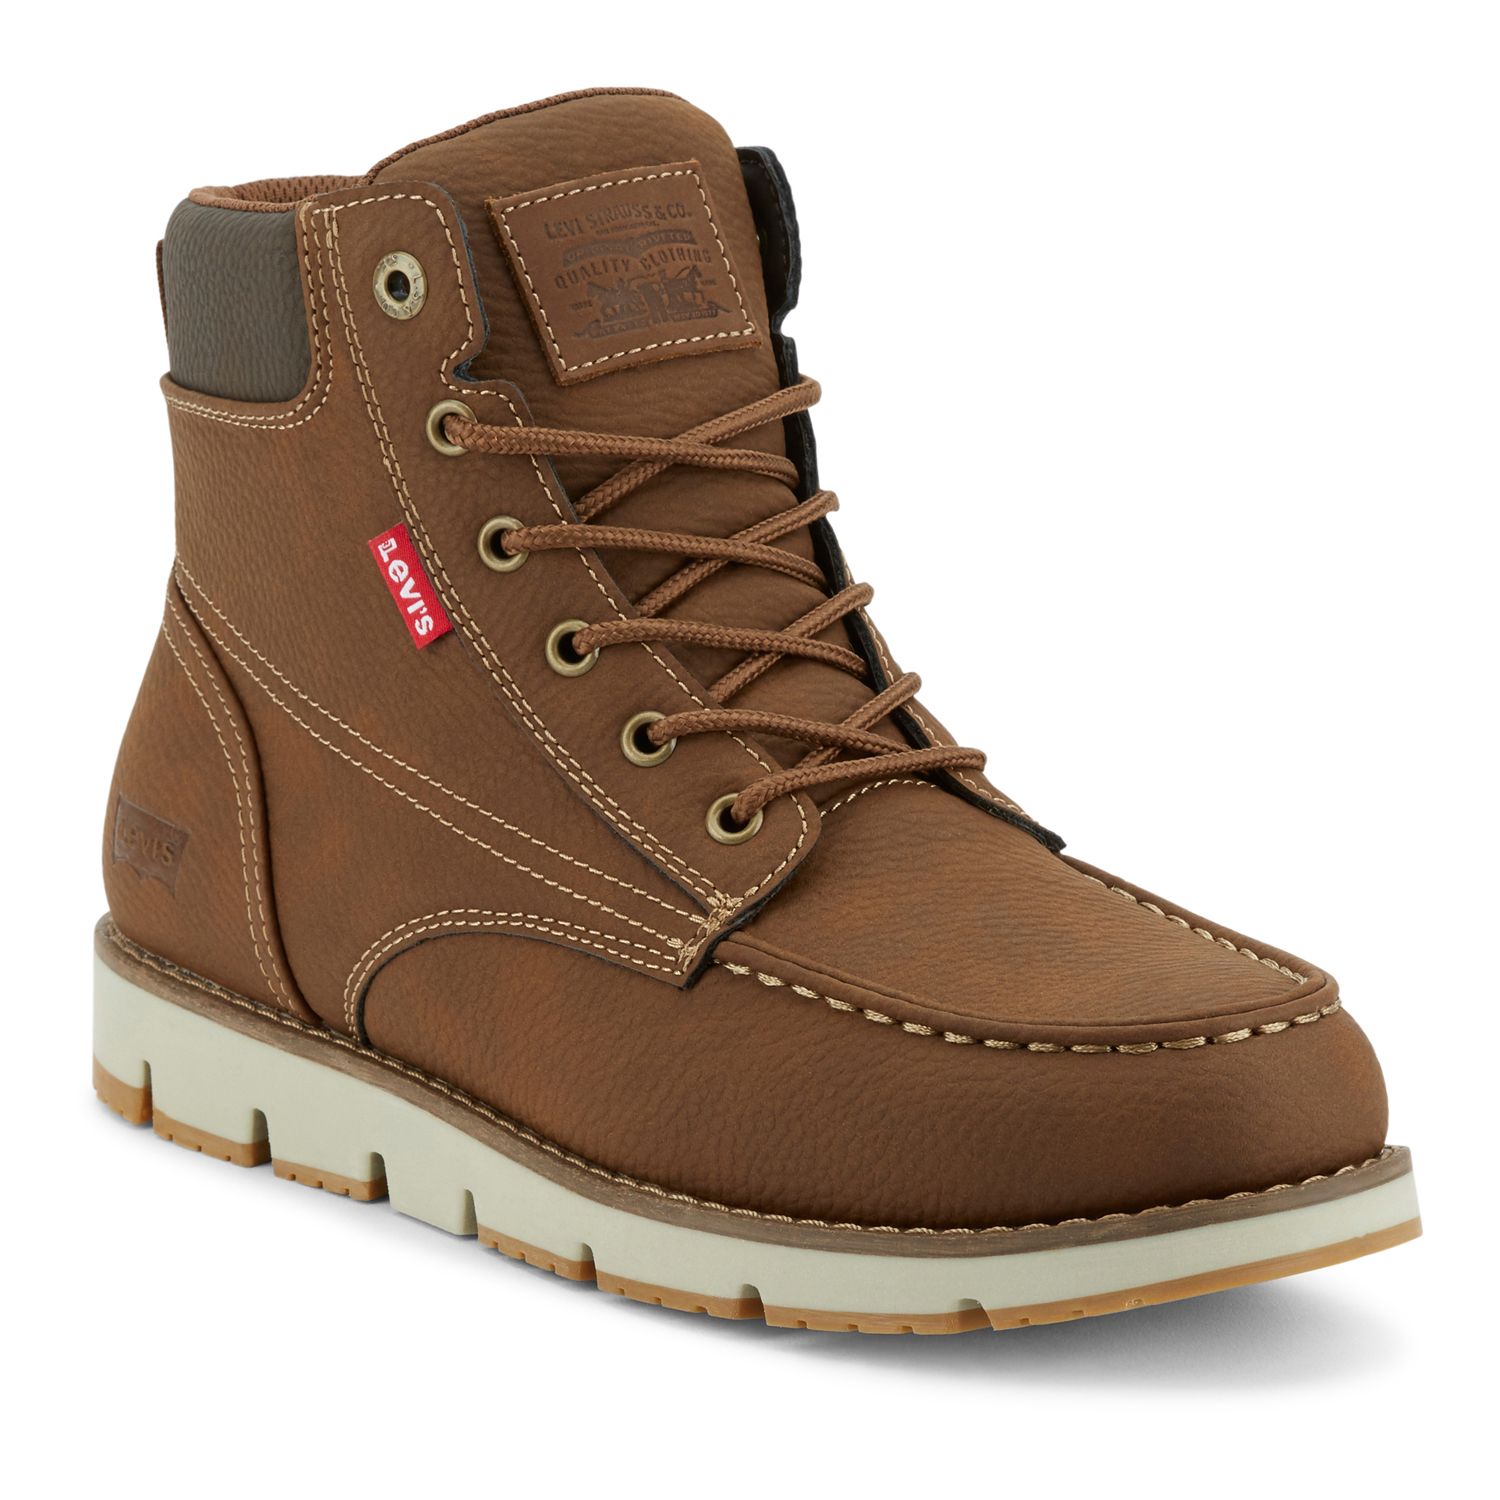 Image for Levi's Dean Men's Ankle Boots at Kohl's.